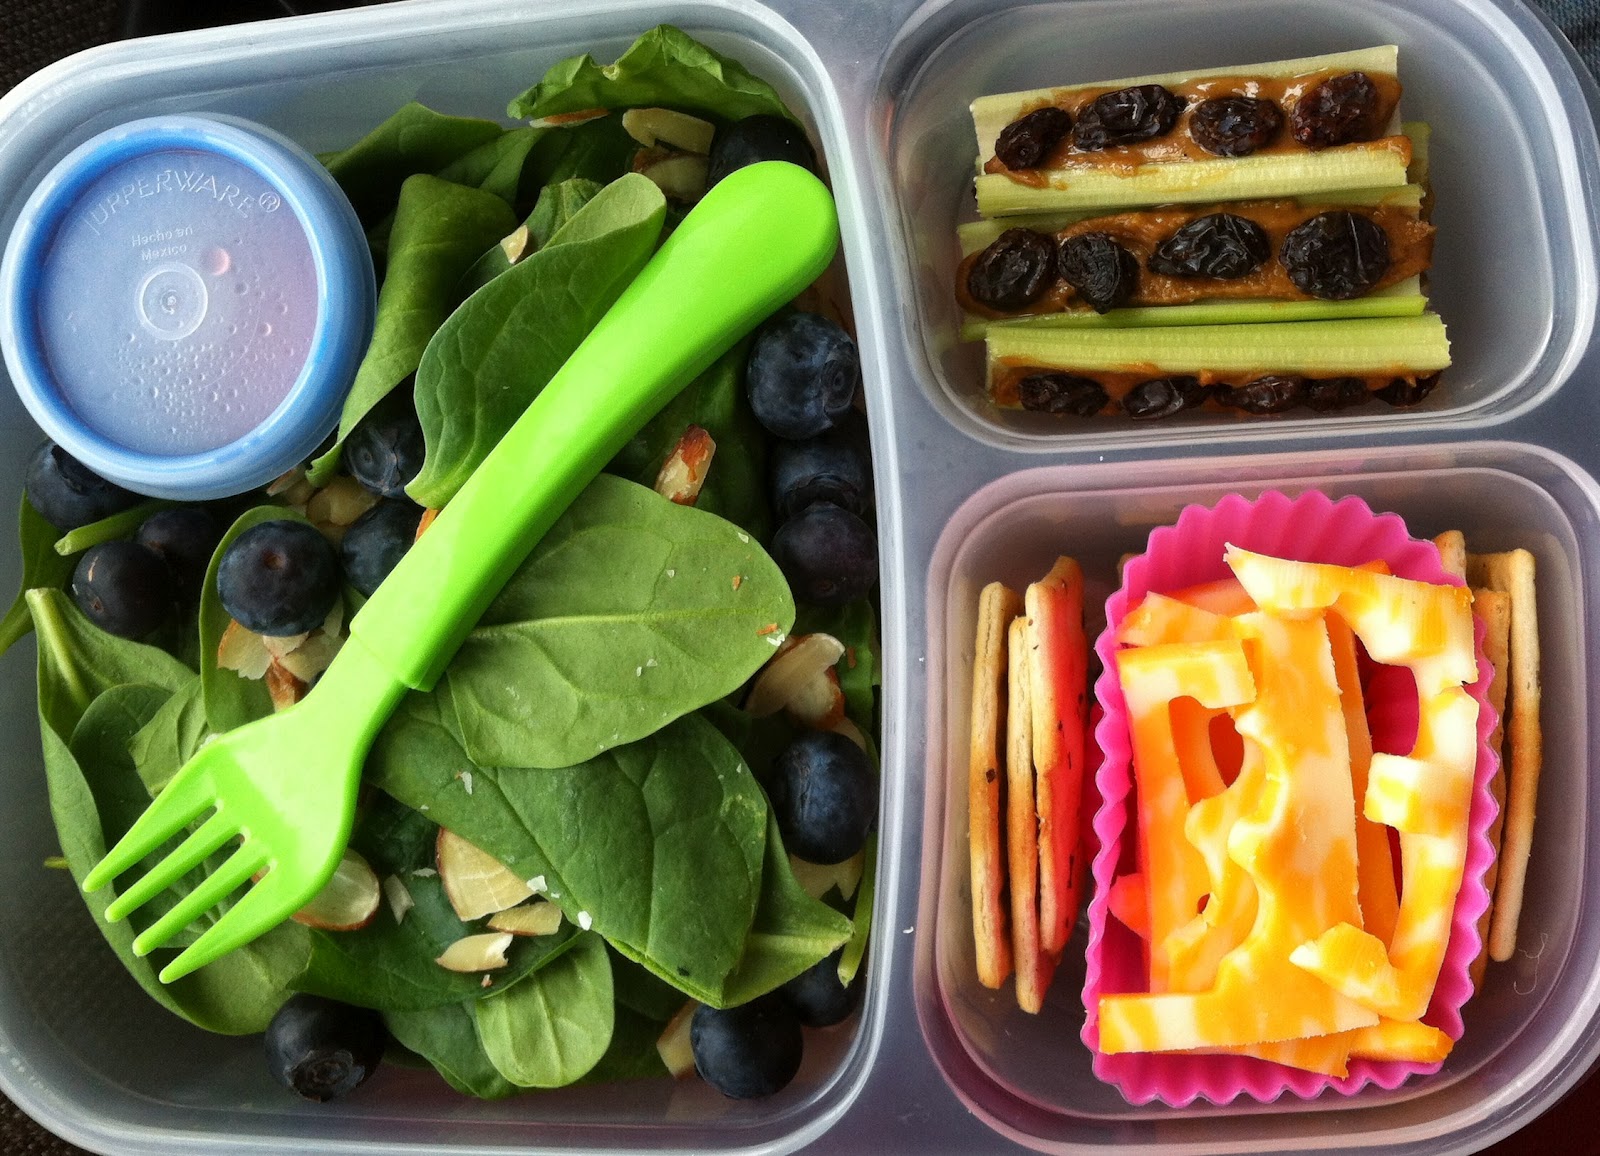 Keeley McGuire: Lunch Made Easy: 20 Non-Sandwich School Lunch Ideas for Kids!